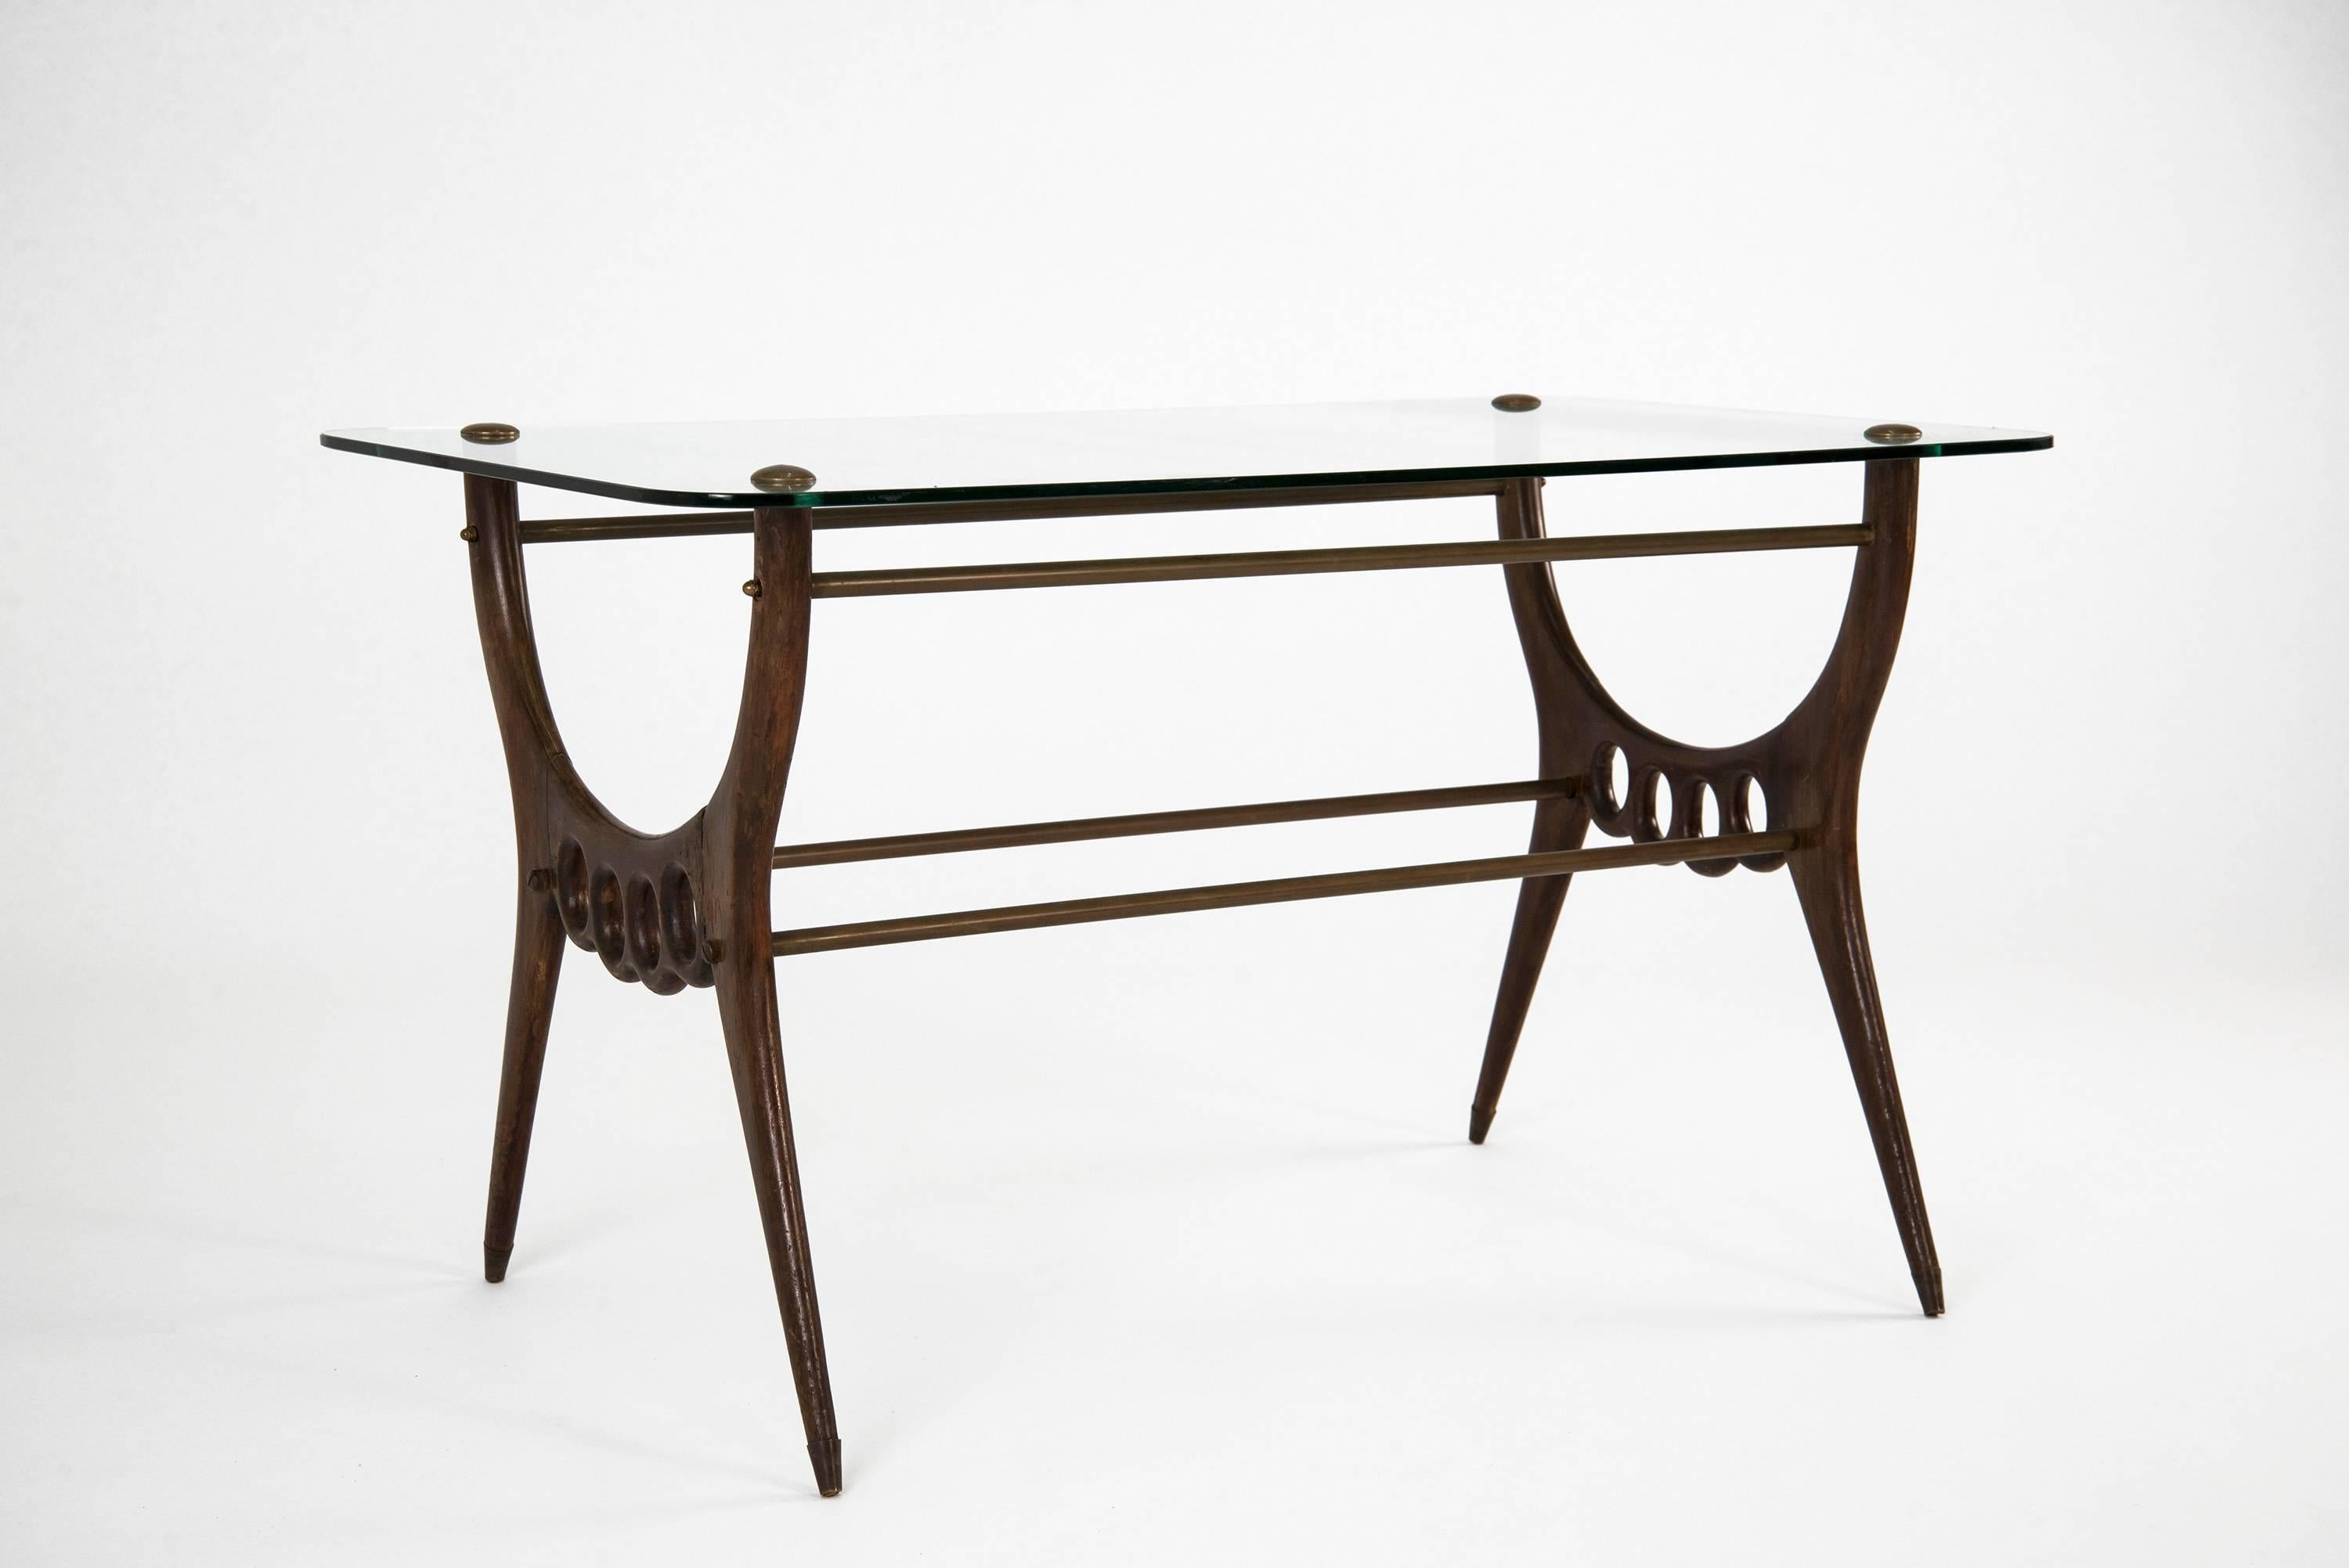 Elegant low table manufactured in Italy in the 1950s. Wooden structure, brass beams, glass top. Good vintage conditions.